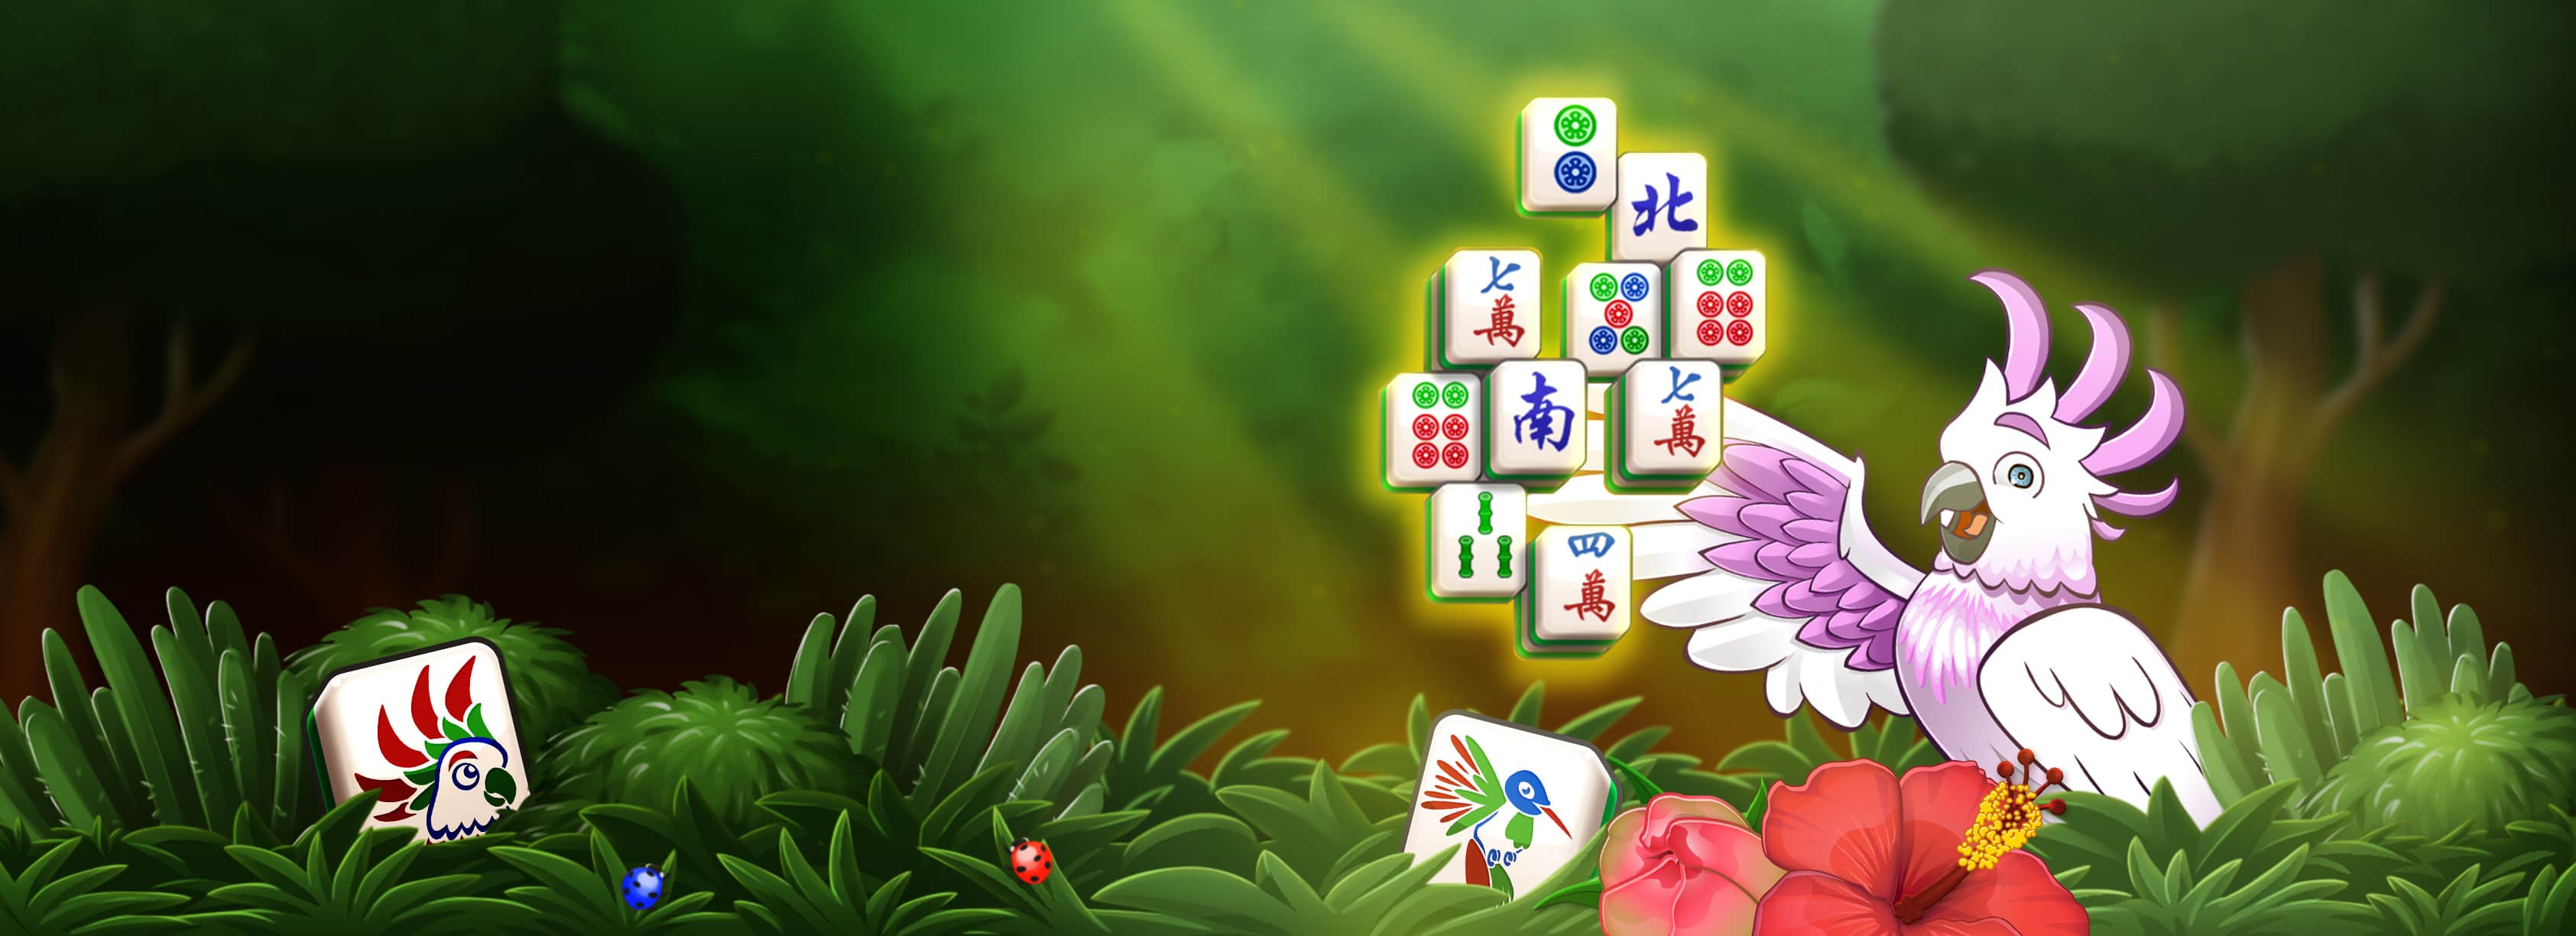 Mahjongg - Play Online + 100% For Free Now - Games